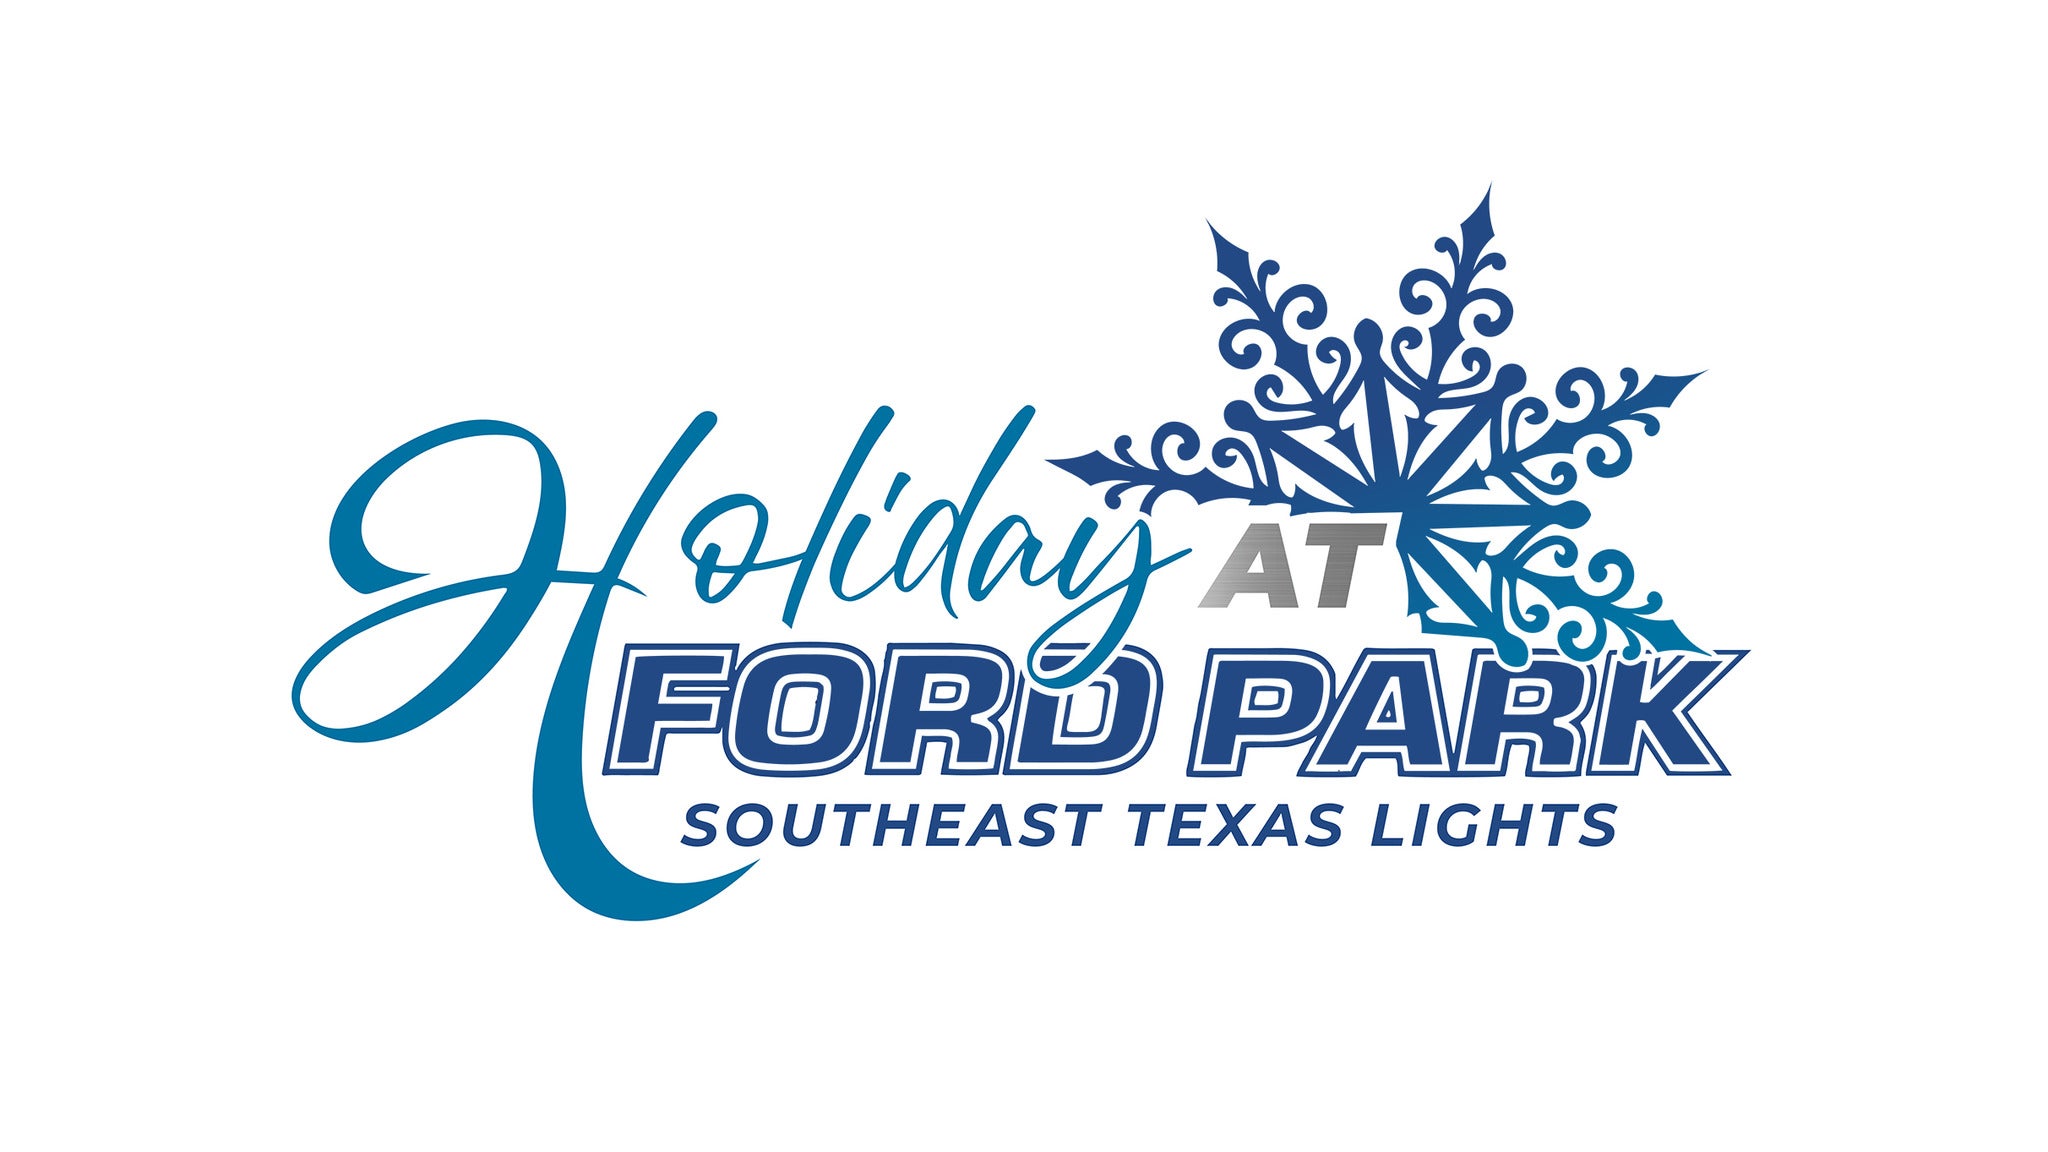 Holiday at Ford Park - Southeast Texas Lights in Beaumont promo photo for $15 Adult Thursday presale offer code